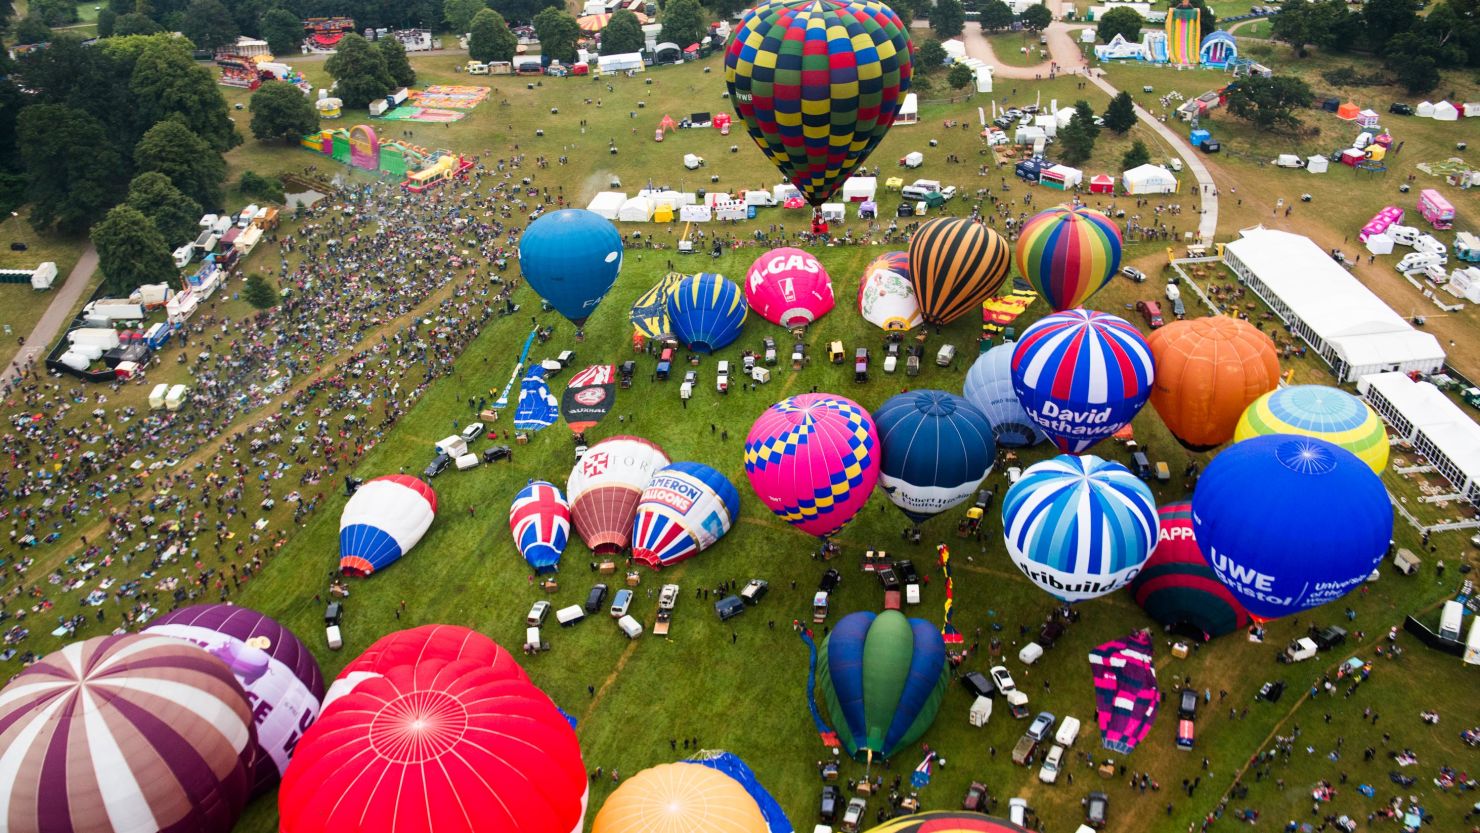 An aerial view of the launch field at Ashton Court shows balloons preparing for the mass lift Sunday